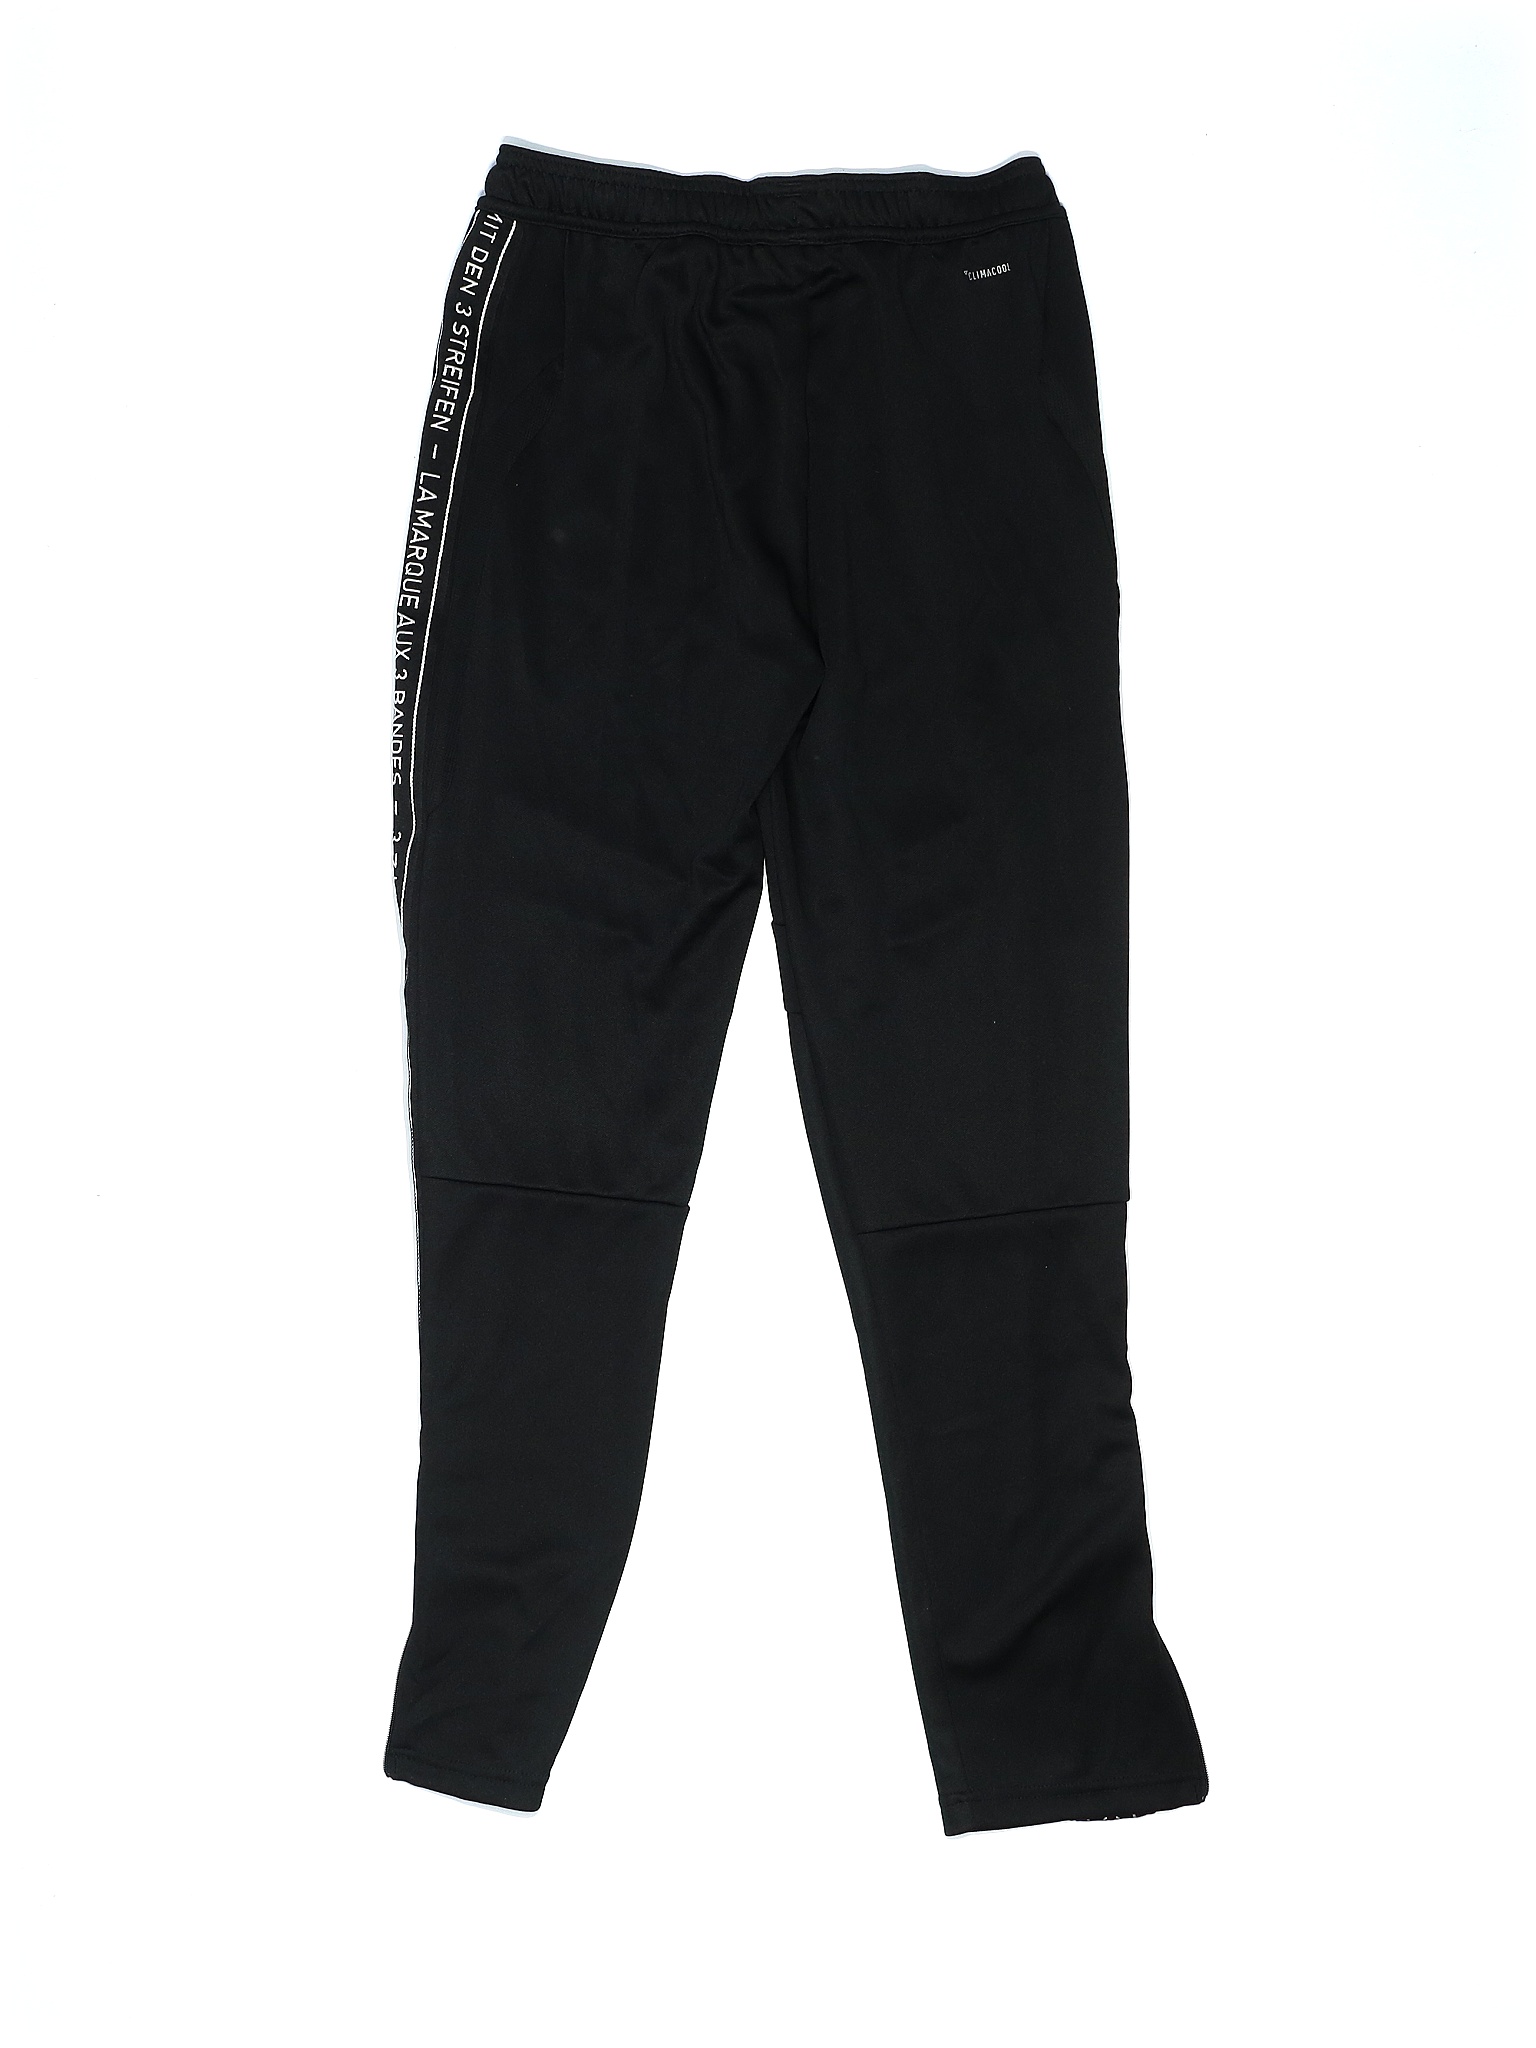 Adidas 100% Polyester Solid Black Track Pants Size M (Kids) - 65% off